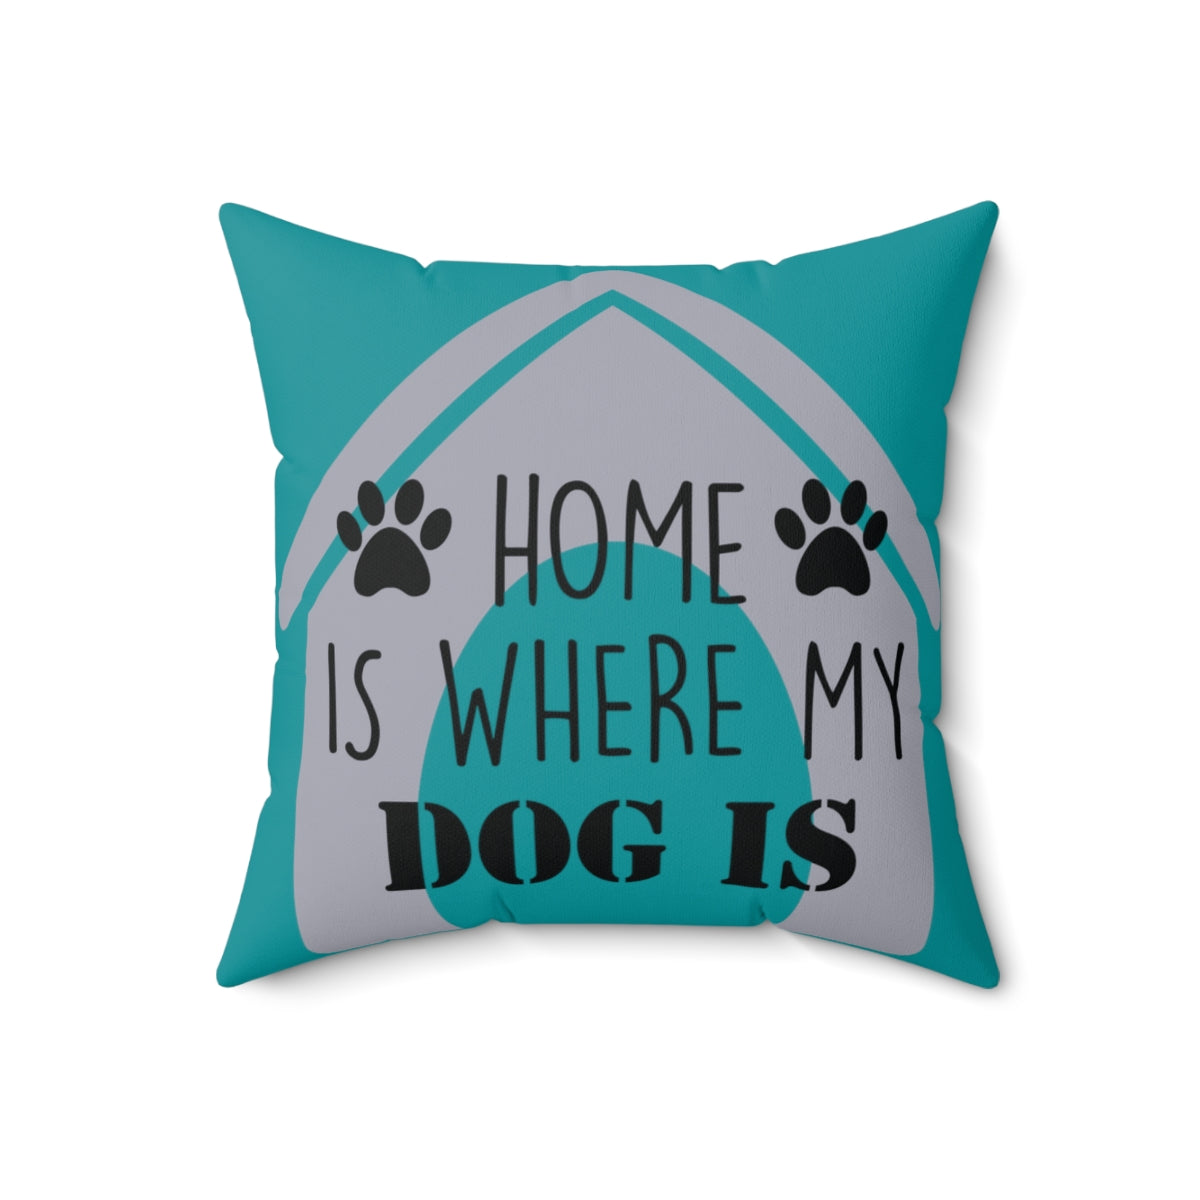 Teal Square Pillow Case - Home Is Where My Dog Is - Home Decor Pillow Cover - Accent Pillow Cover